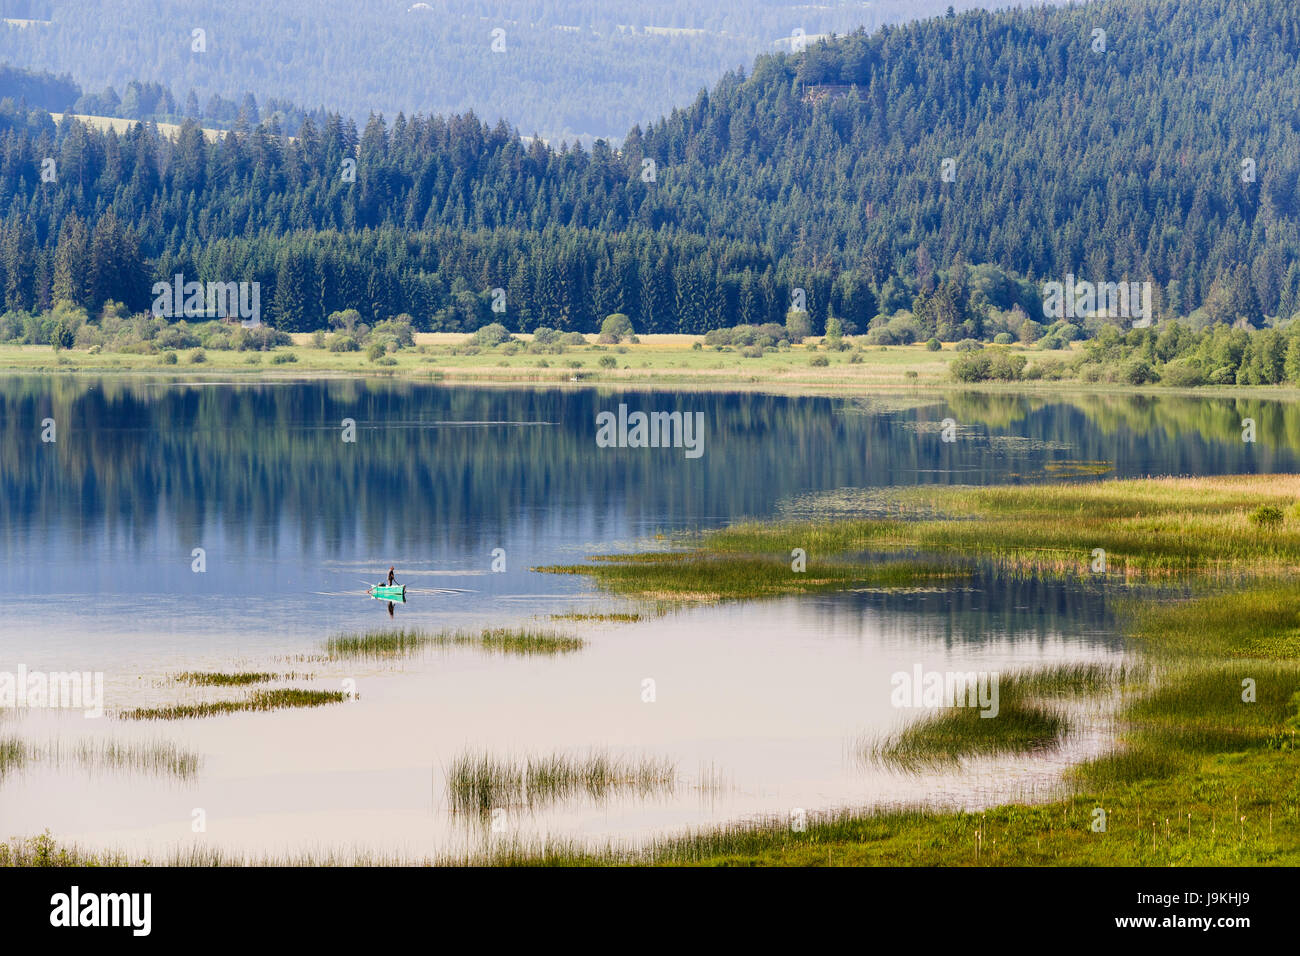 France, Doubs, Jura Mountains, Labergement Sainte Marie, Remoray lake in spring Stock Photo